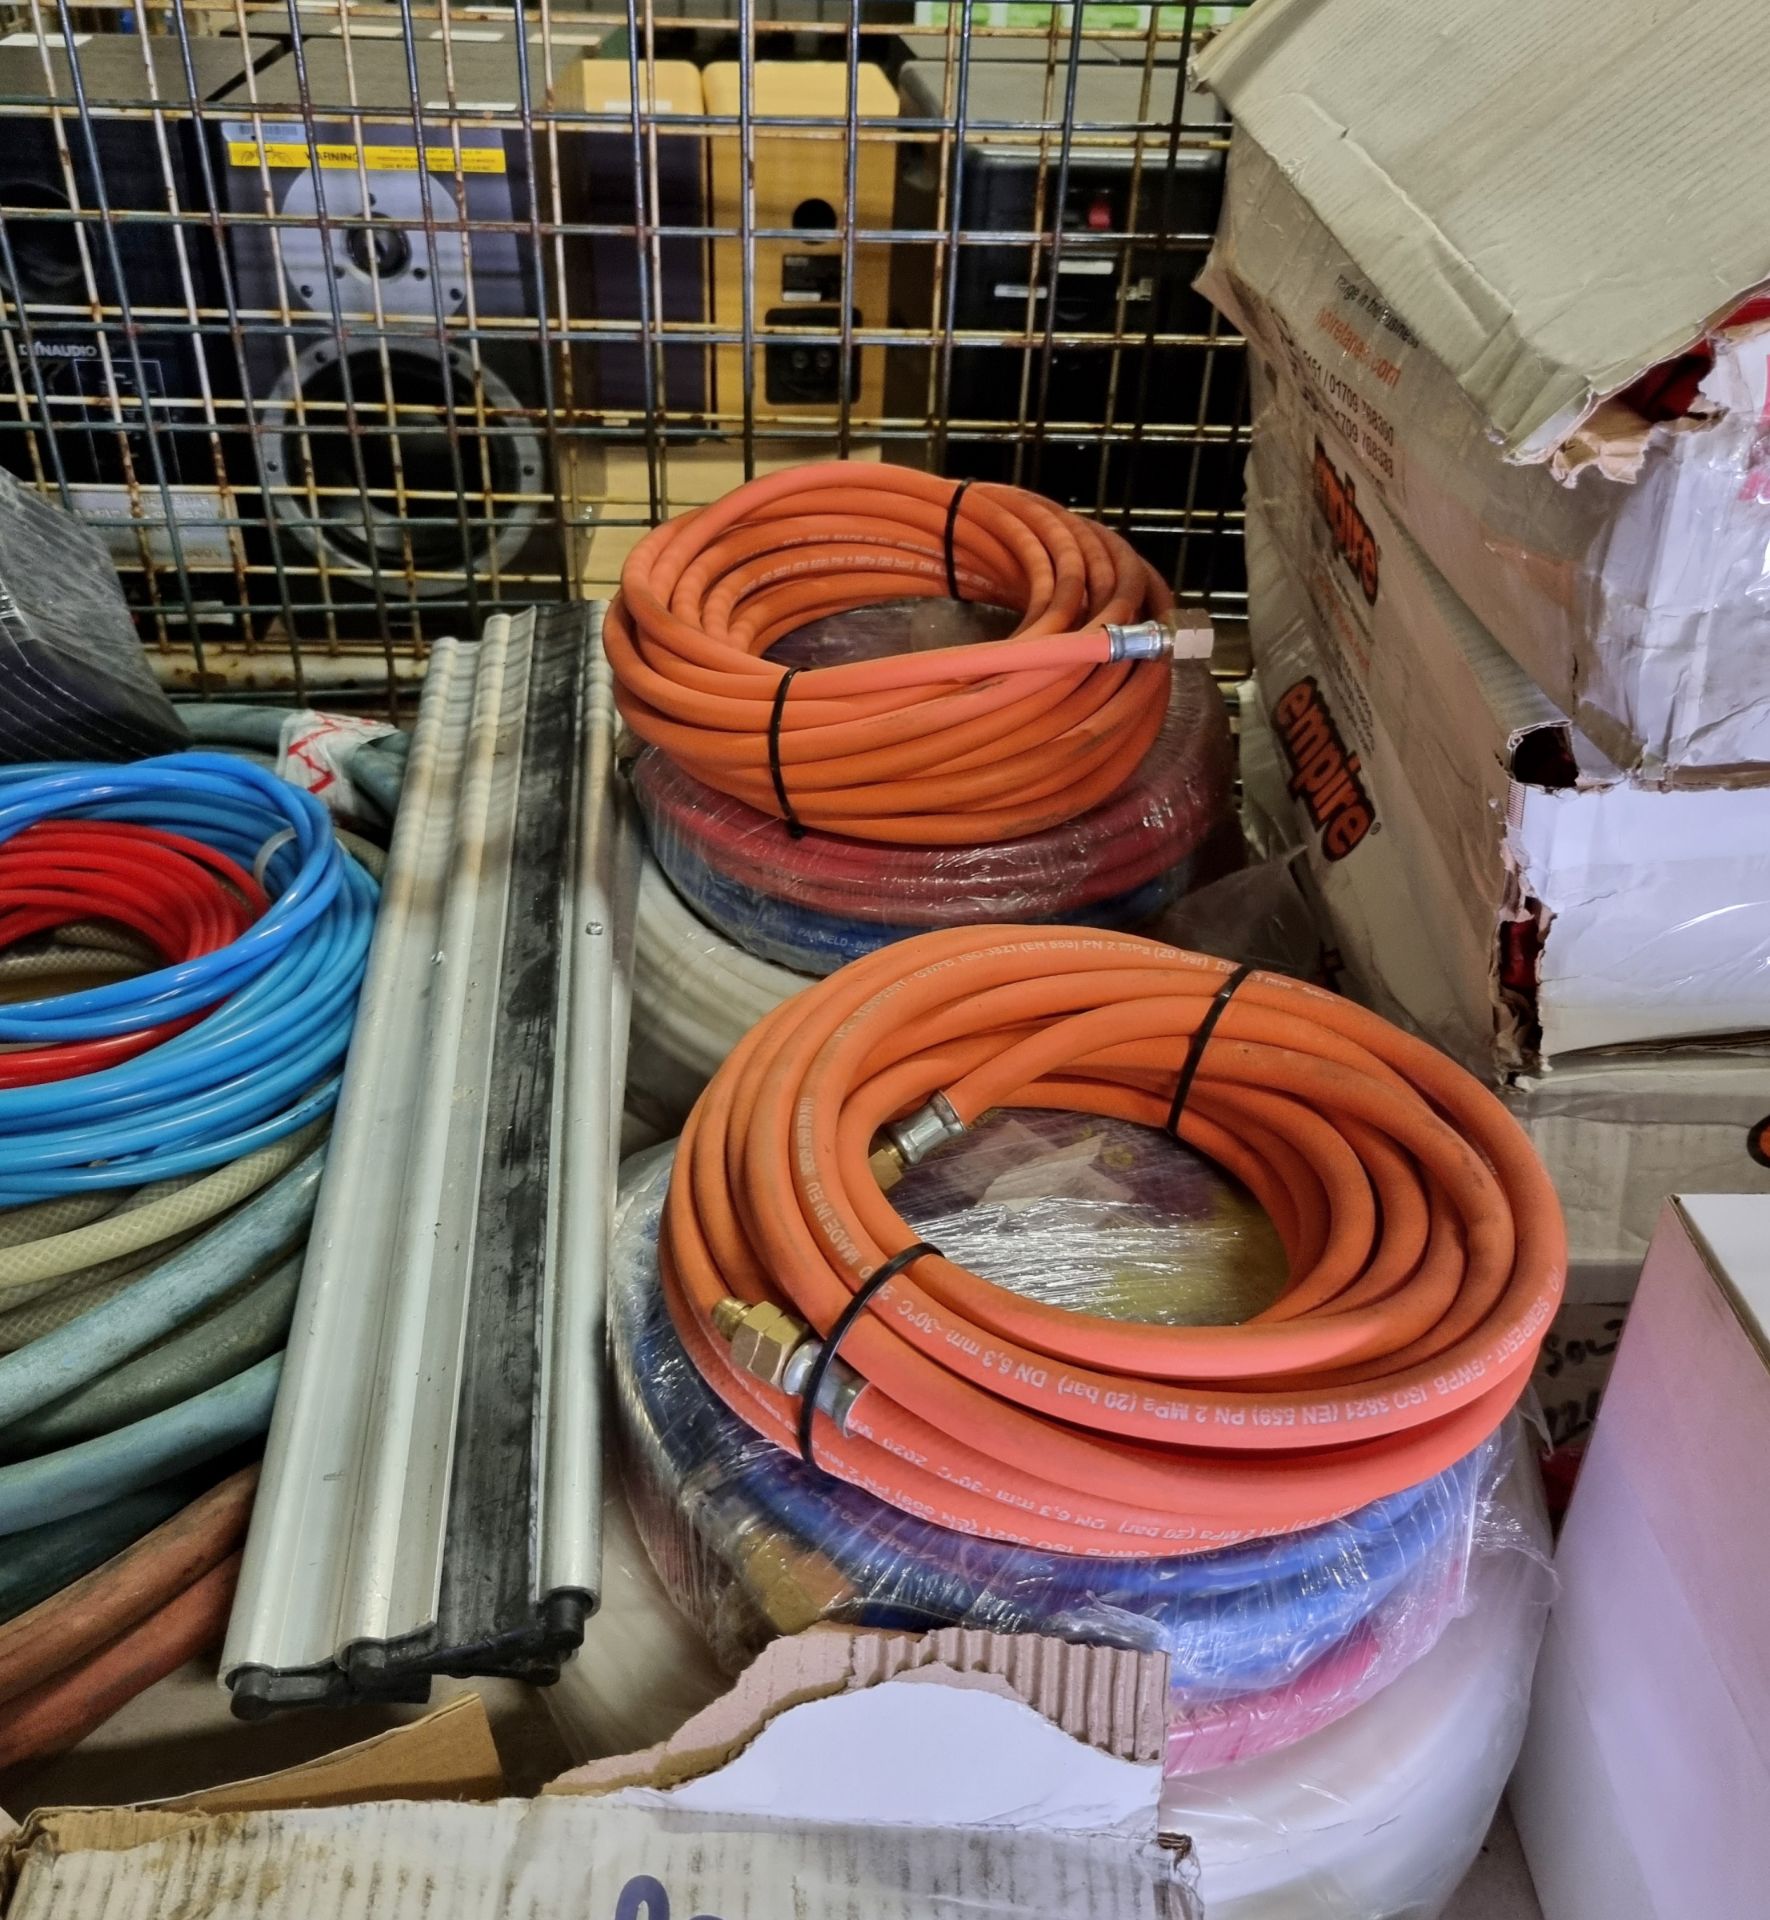 Workshop supplies and consumables - asbestos waste bags, hazard tape, air line, pressure hose - Image 5 of 6